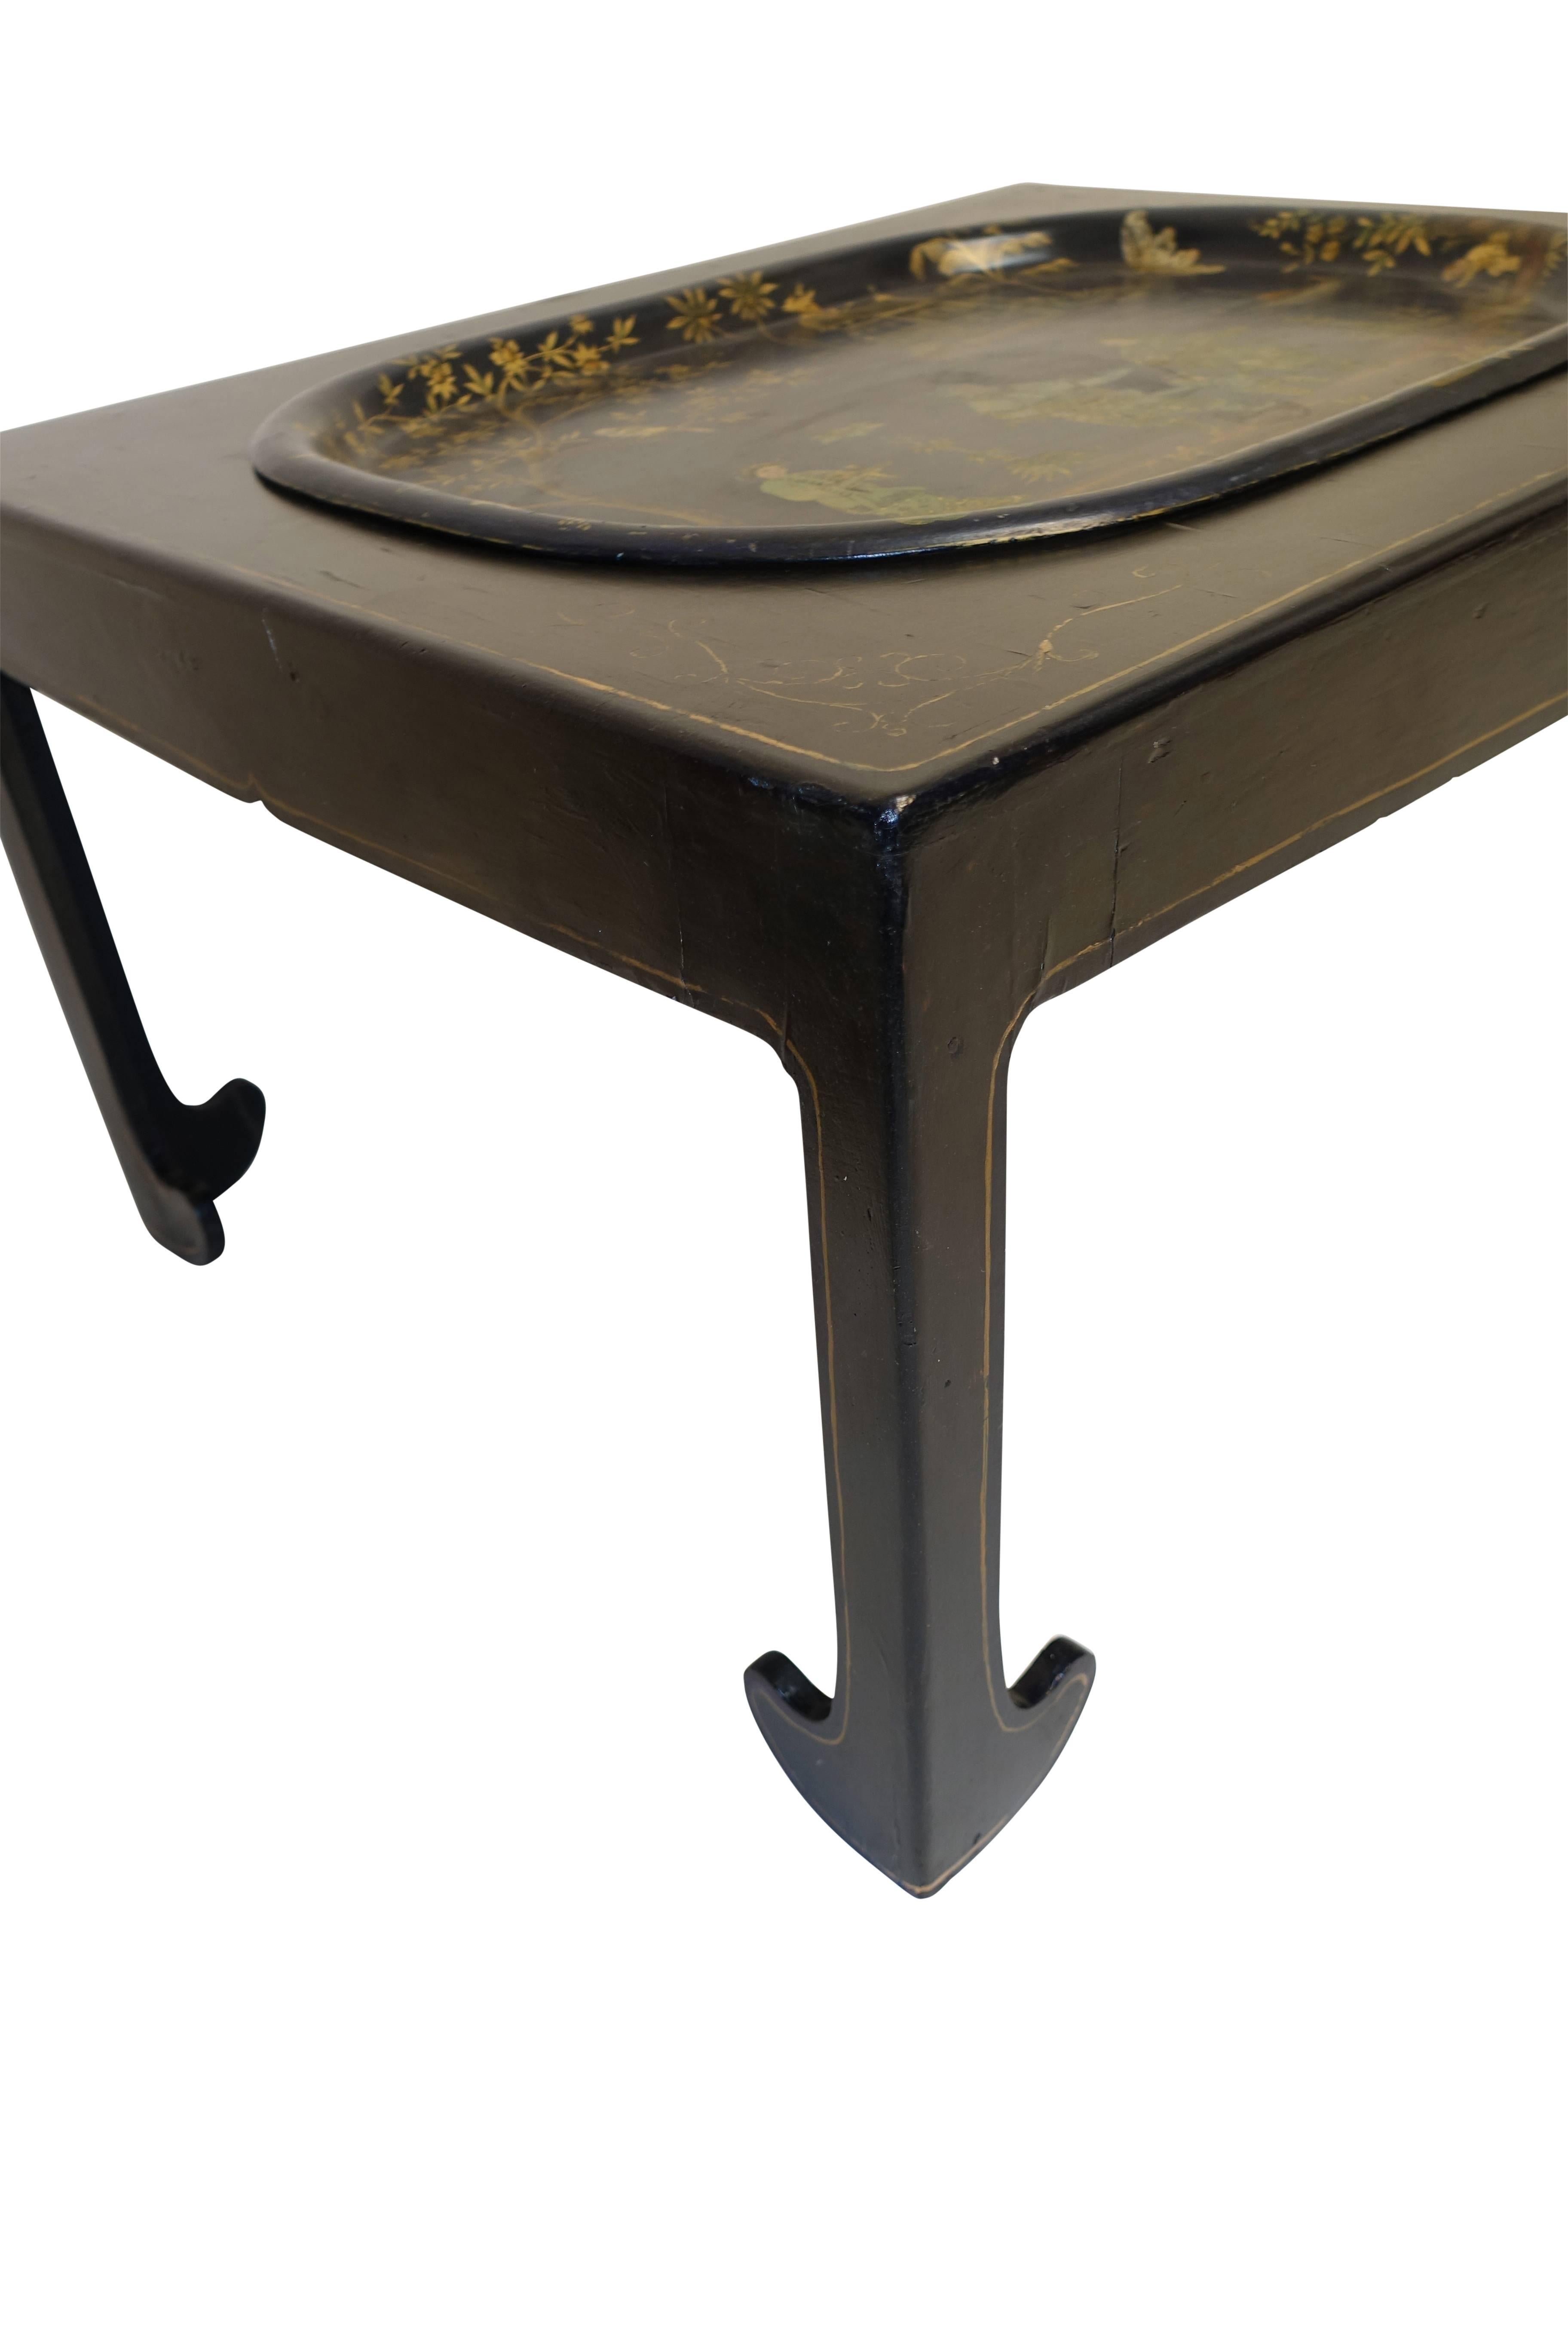 Navy Blue Tole Tray Table with Black Asian Style Stand, England, 19th Century 1